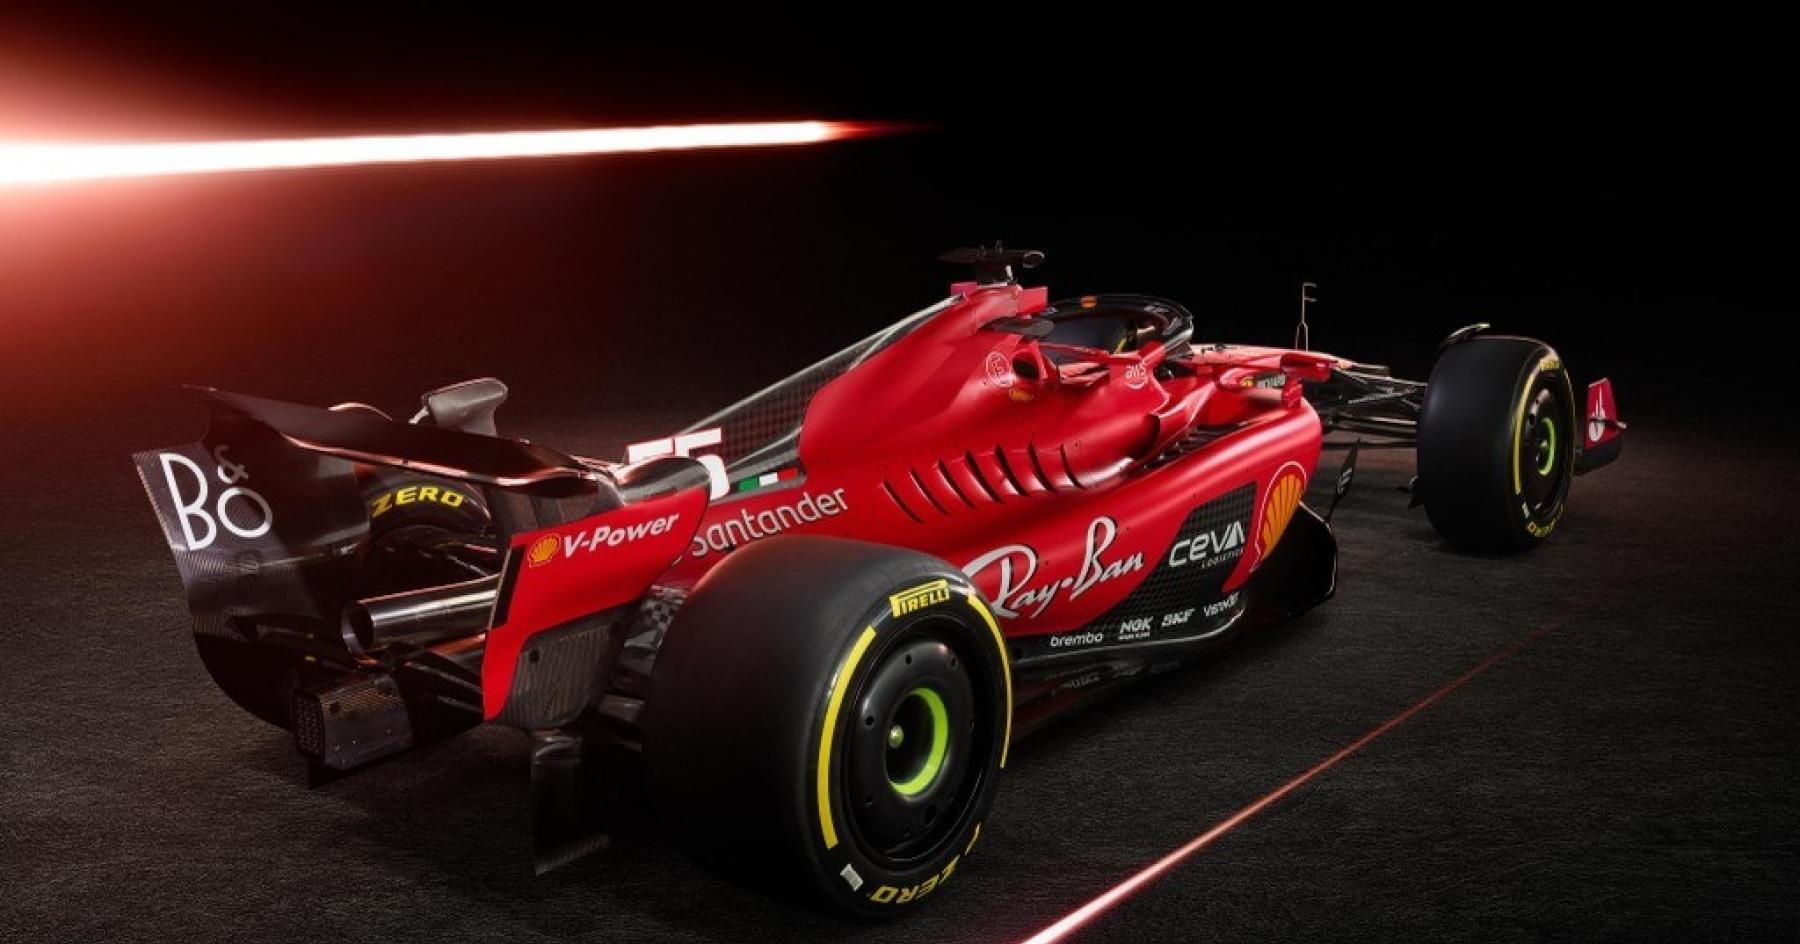 In Photos Ferrari S New And Evolved Sf F1 Car Racingnews365